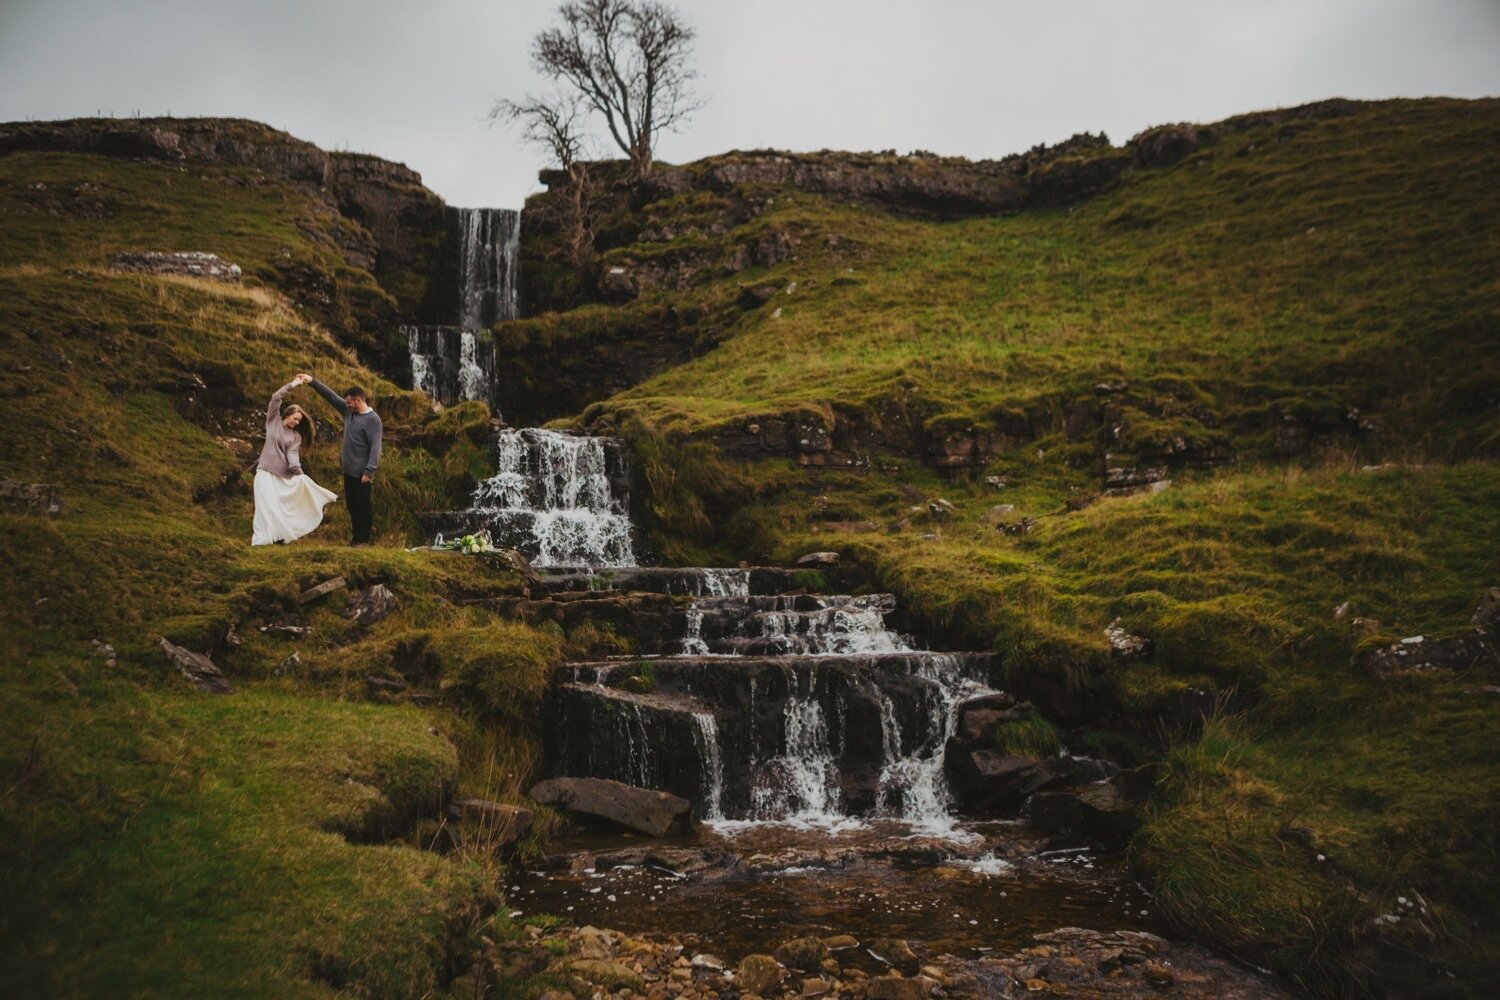 34_TWS-137__grey_dramatic_landscape_alternative_elope_alt_rock_blue_waterfall_winter_flowers_offbeat_dales_waterfalls_autumn_elopement_photography_ribbons_moody_bride_silver_wedding_yorkshire_rainy_cloudy_cosy_weather_photographer_florals_groom.jpg